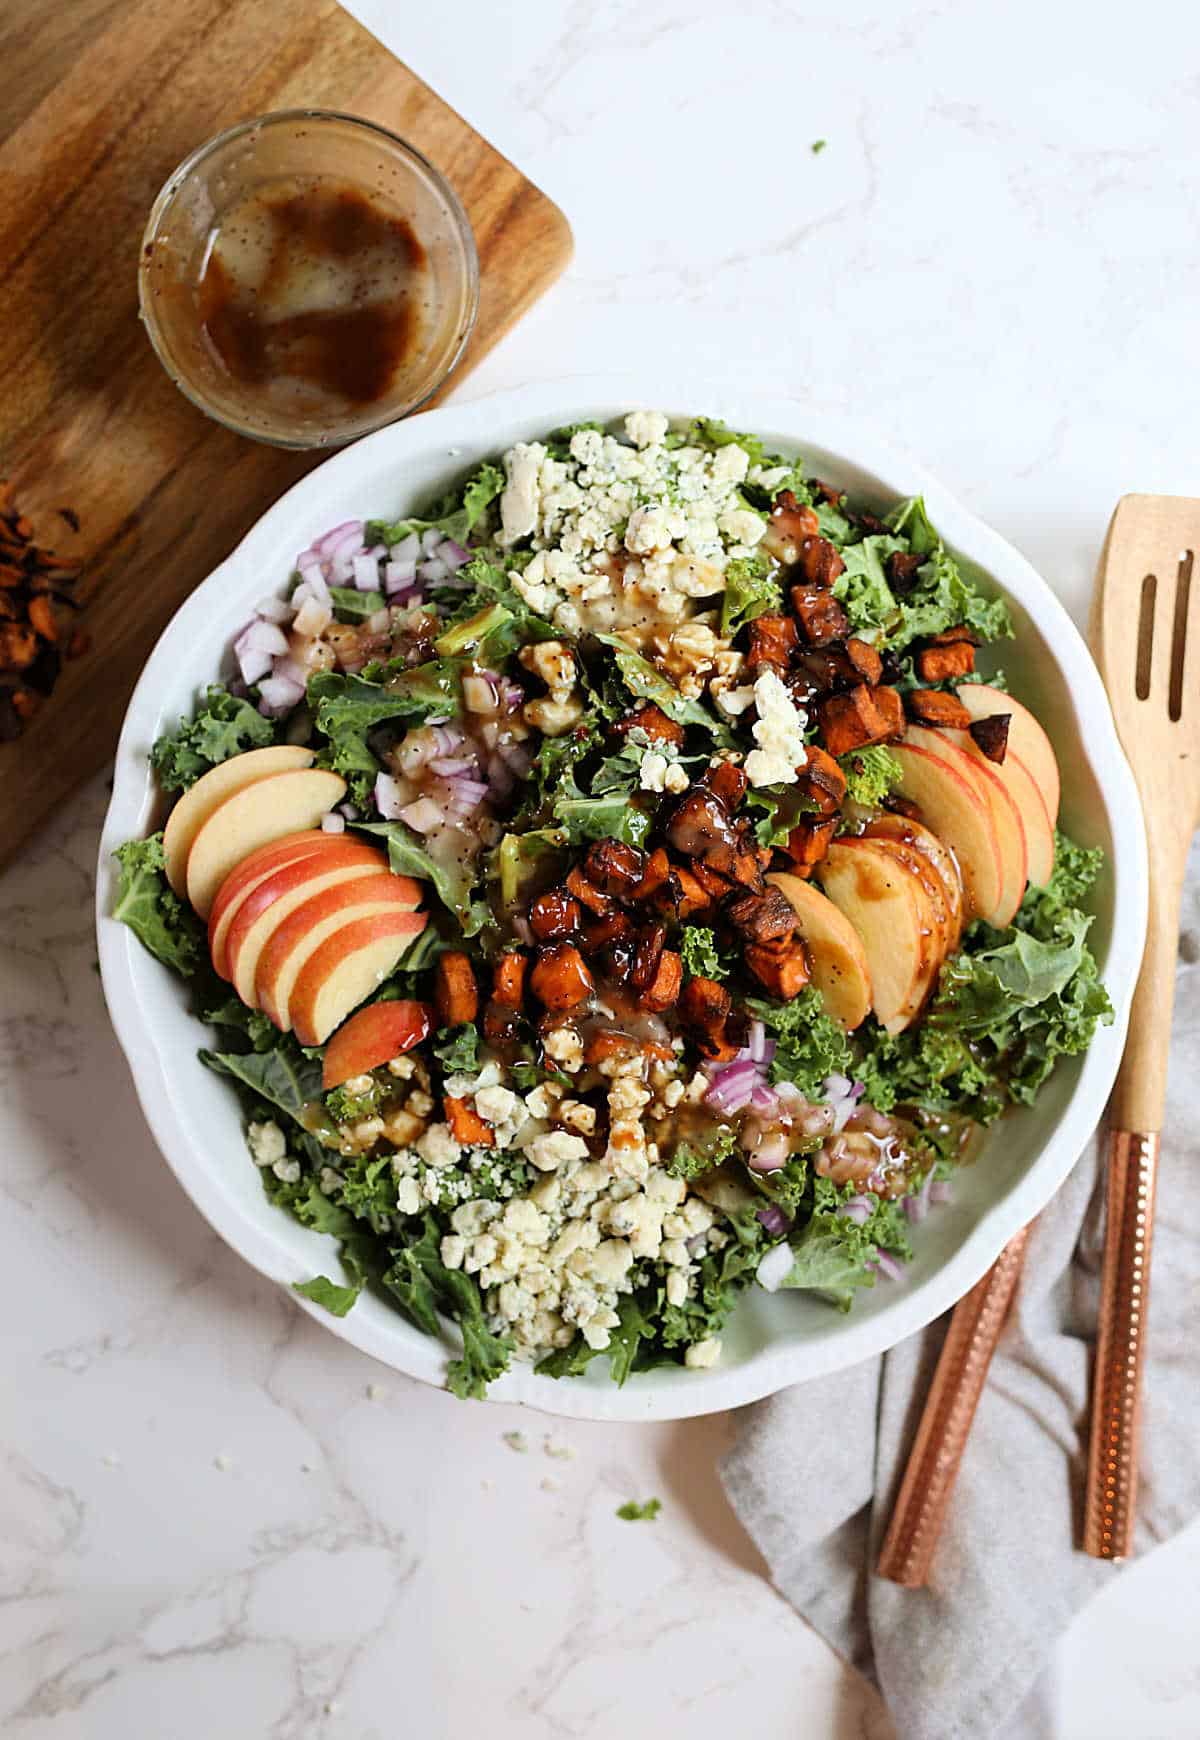 Kale salad with apples blue cheese walnuts and sweet potatoes.